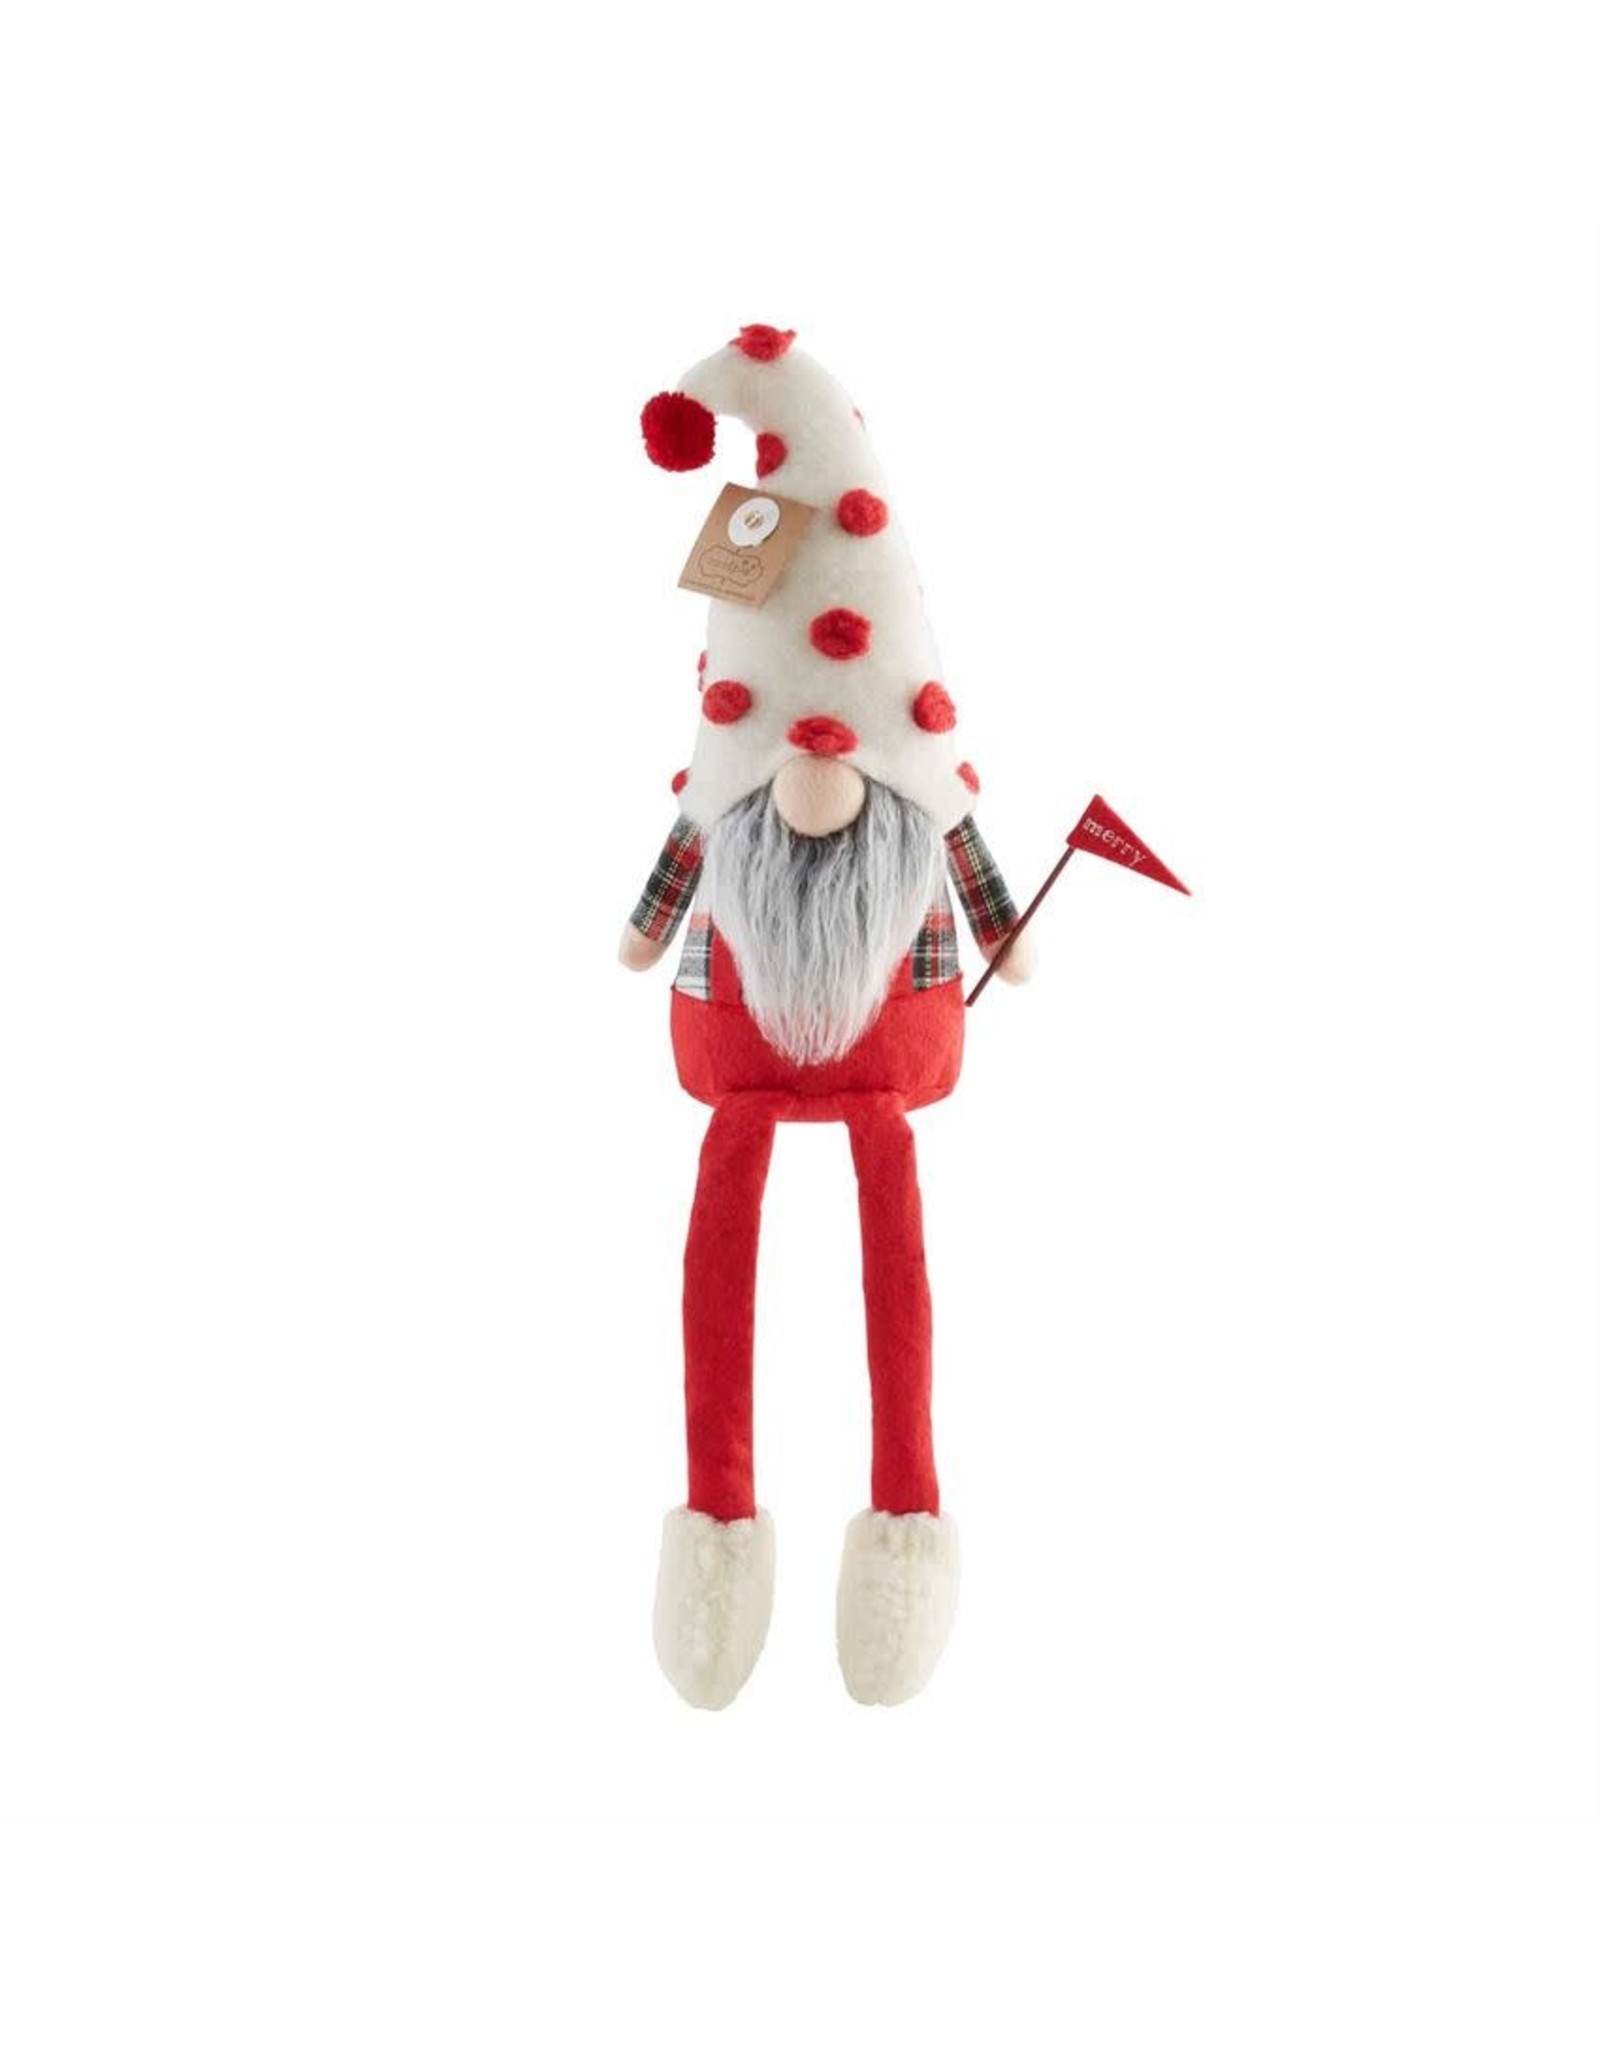 Mud Pie Christmas Gnome With Dangling Legs Holding Merry Flag 9x4 Inch